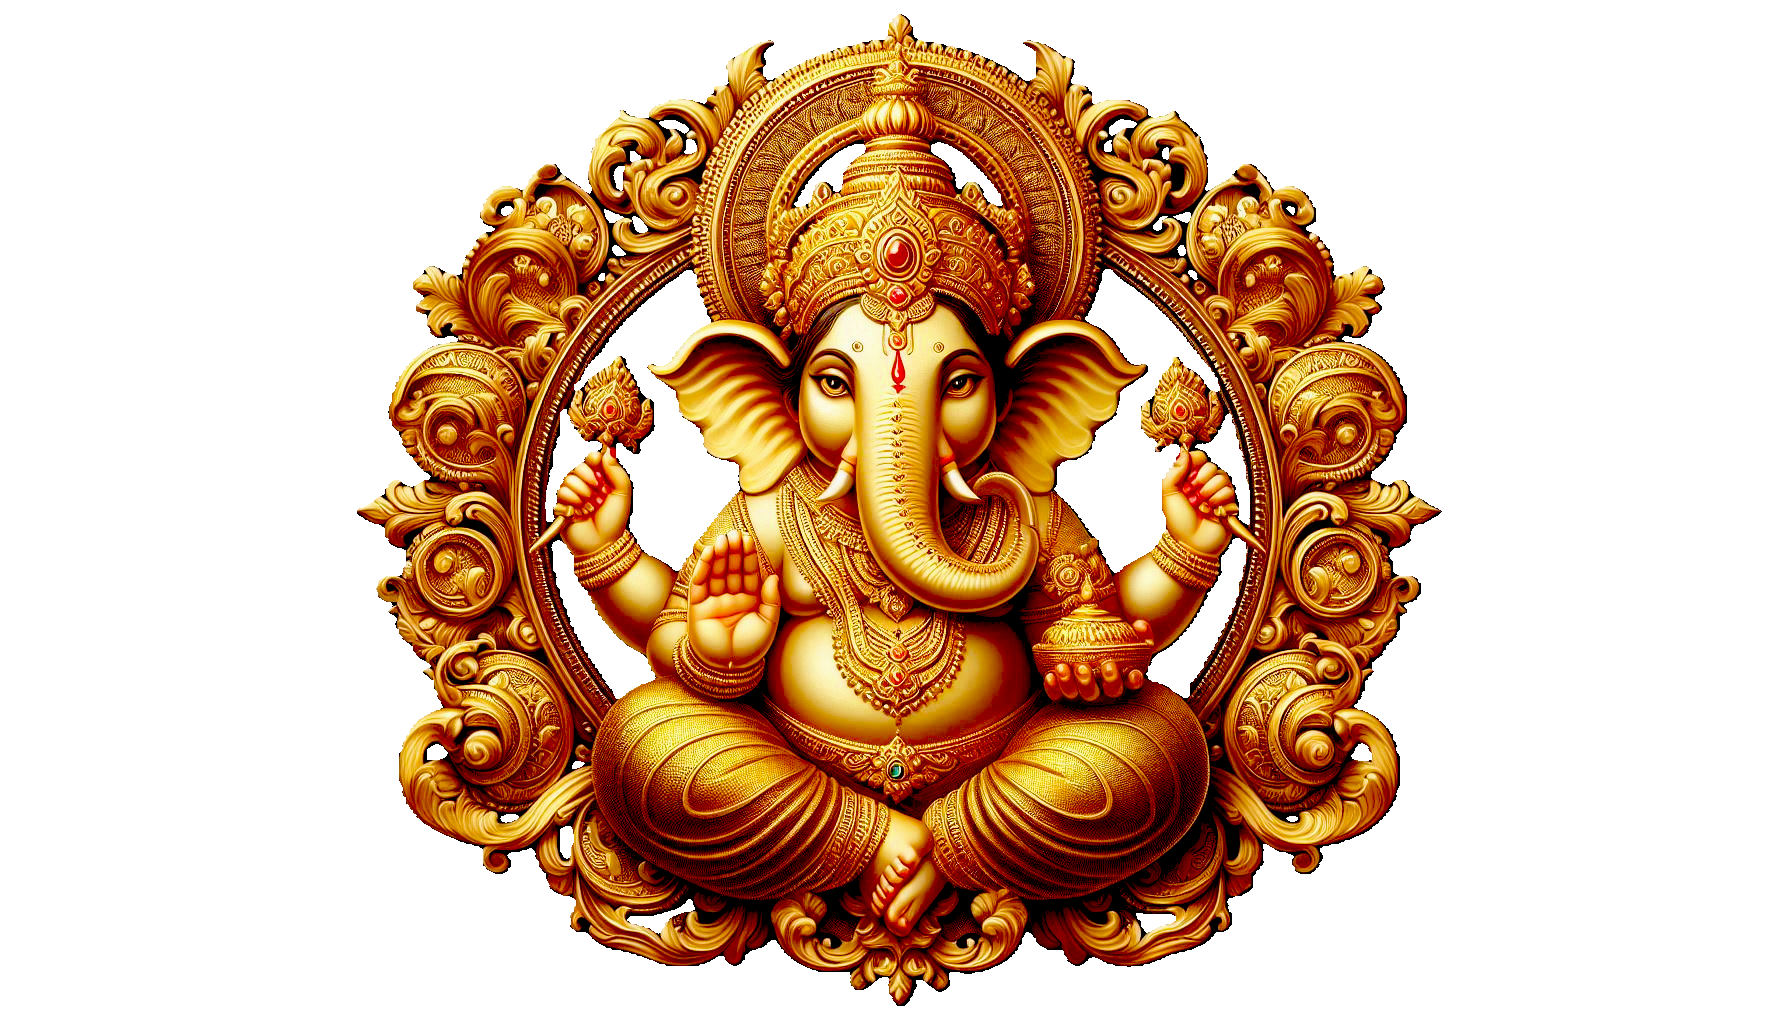 Download Free Happy Ganesh Chaturthi Gold Ganesha png image for Websites, Slideshows, and Designs | Royalty-Free and Unlimited Use.